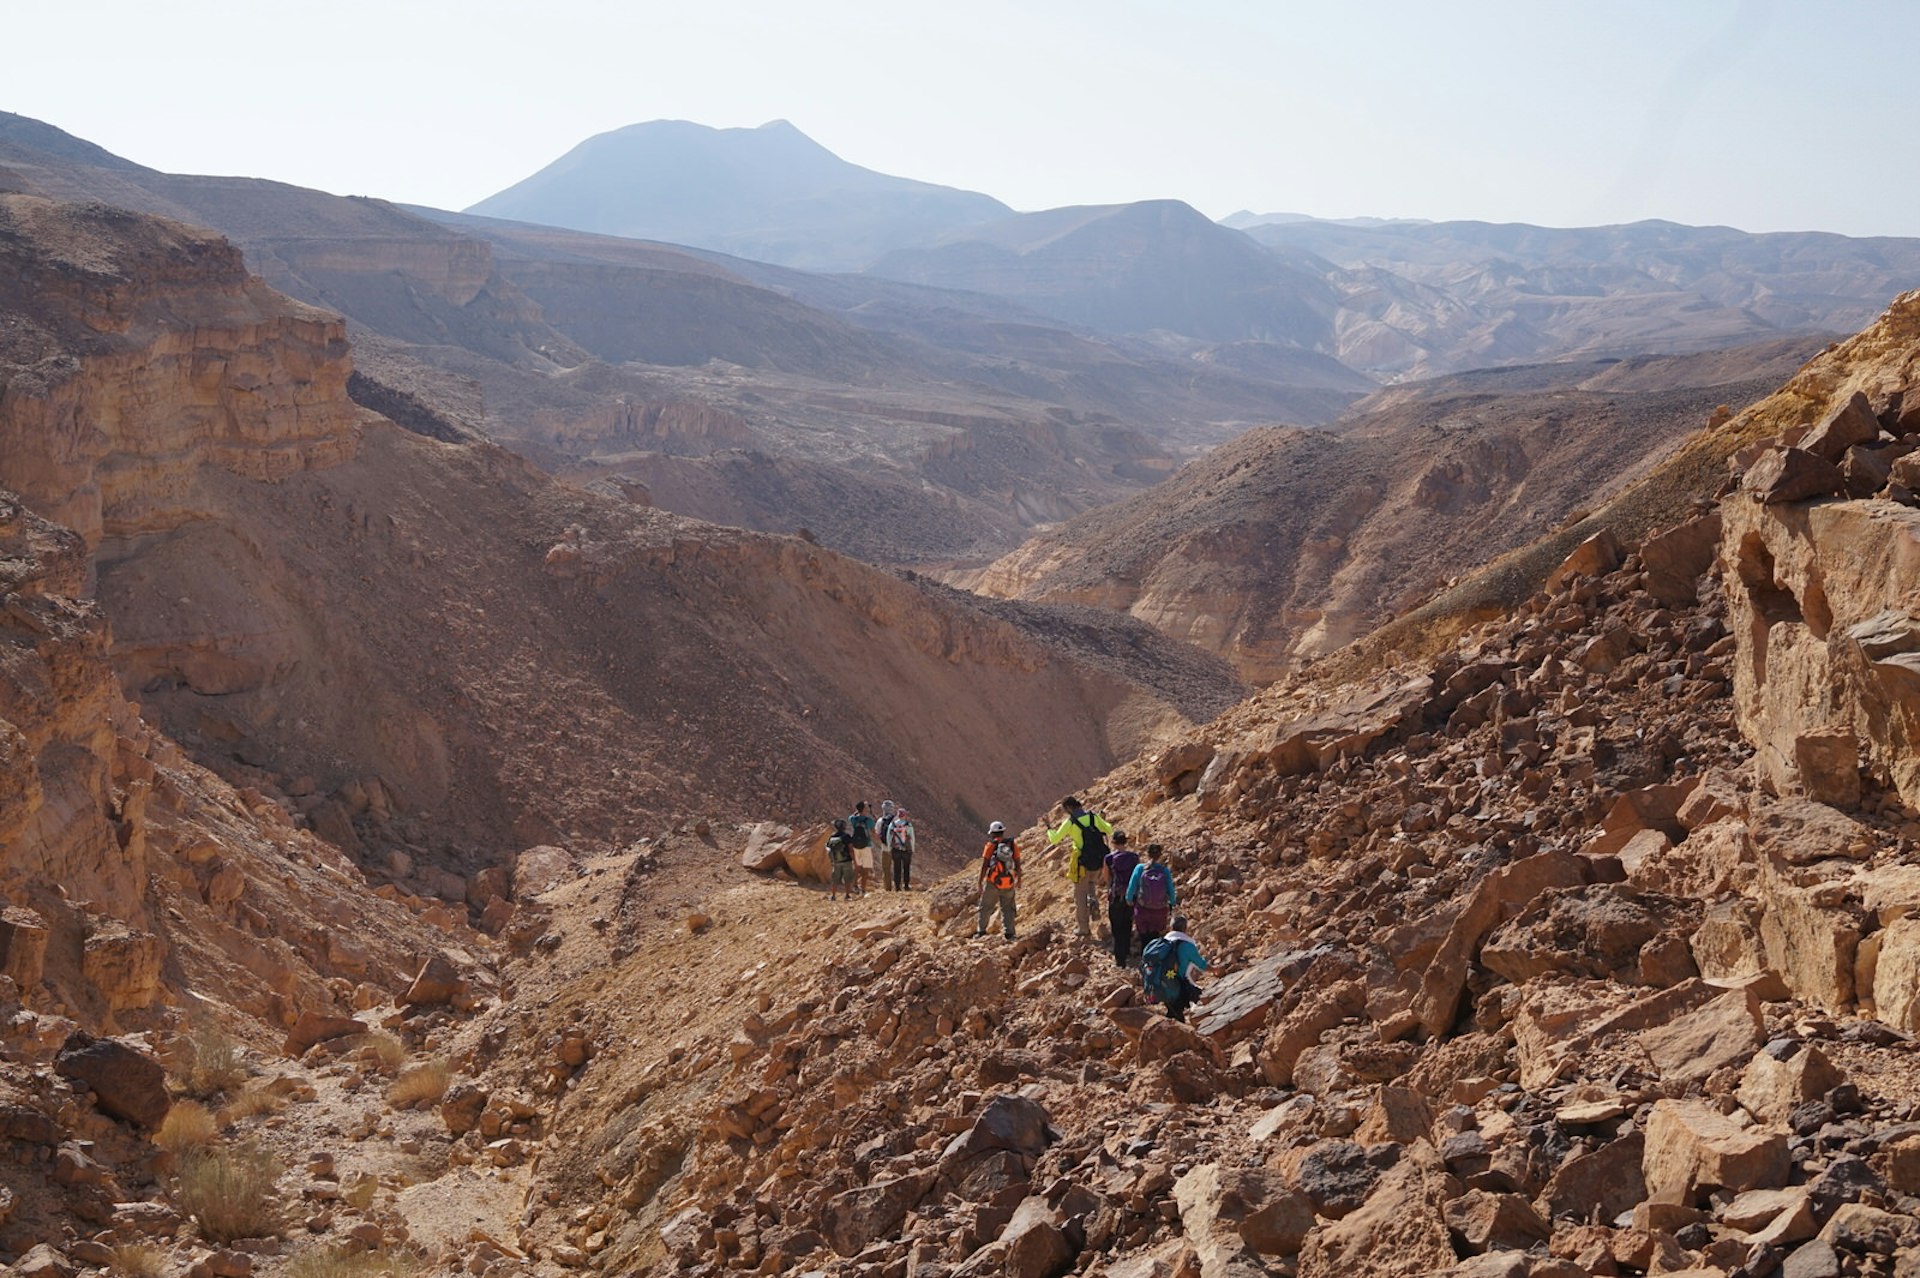 A group of hikers walking along a mountainous section of the Sinai Trail